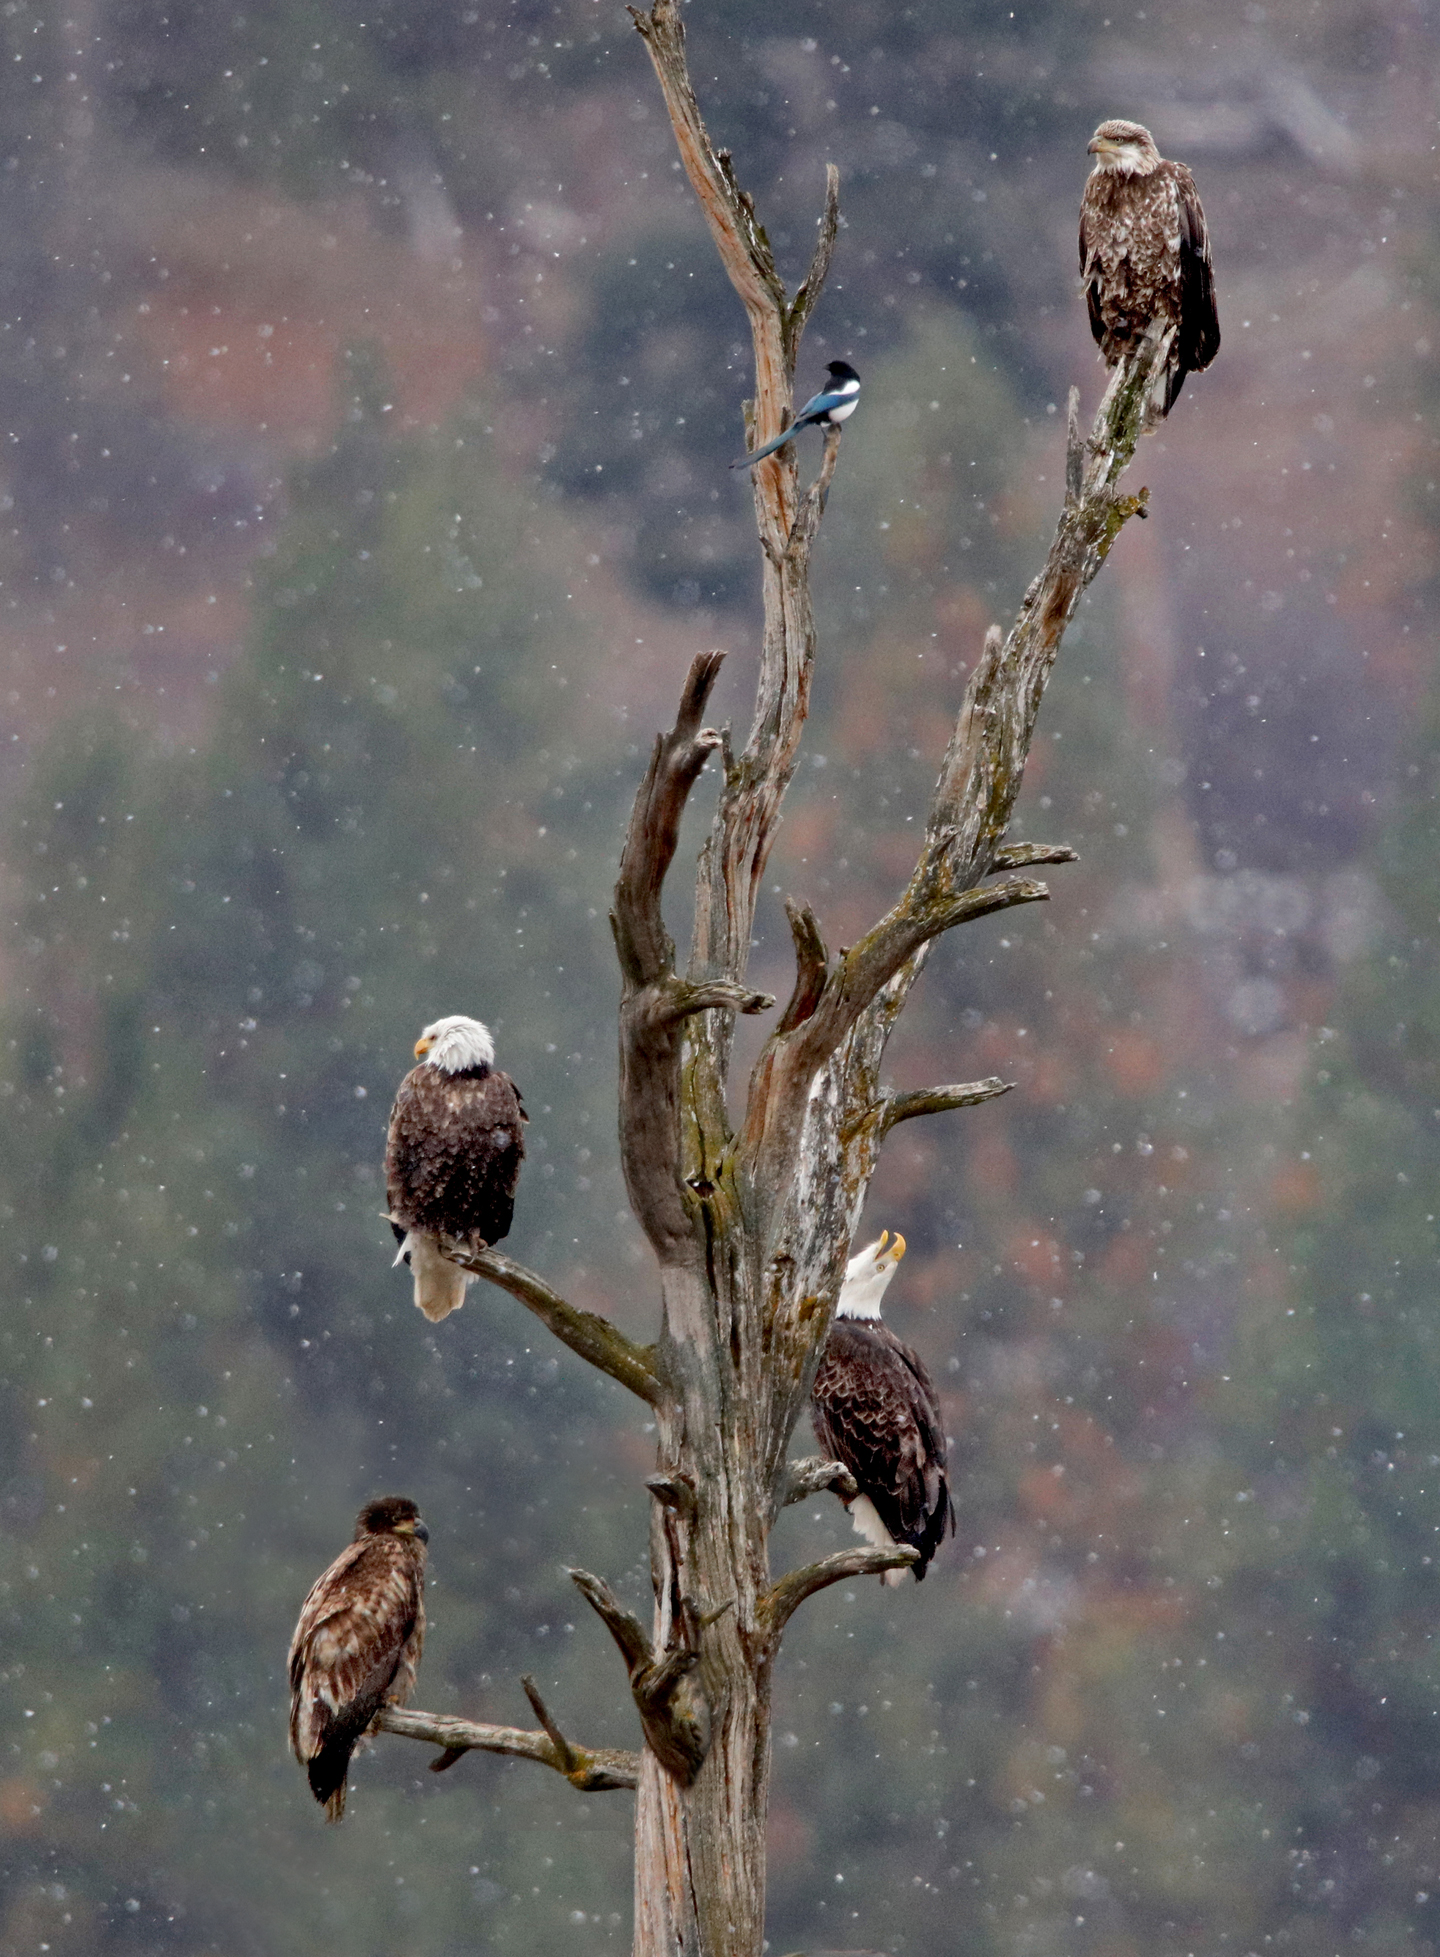 Four bald eagles - two adults, two juveniles and a black-billed magpie.